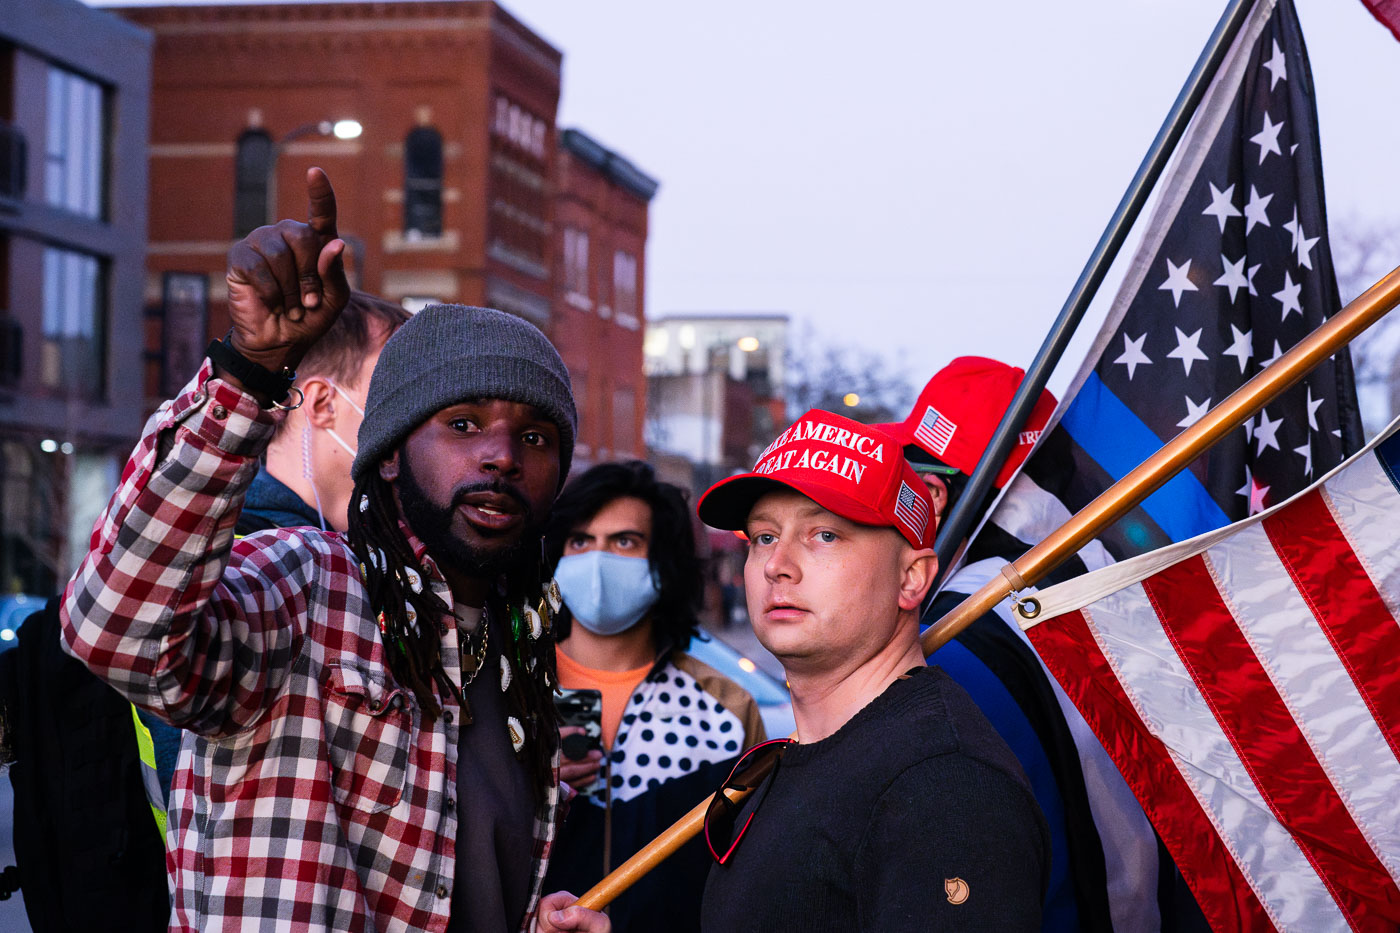 Trump supporters show up at a housing protest